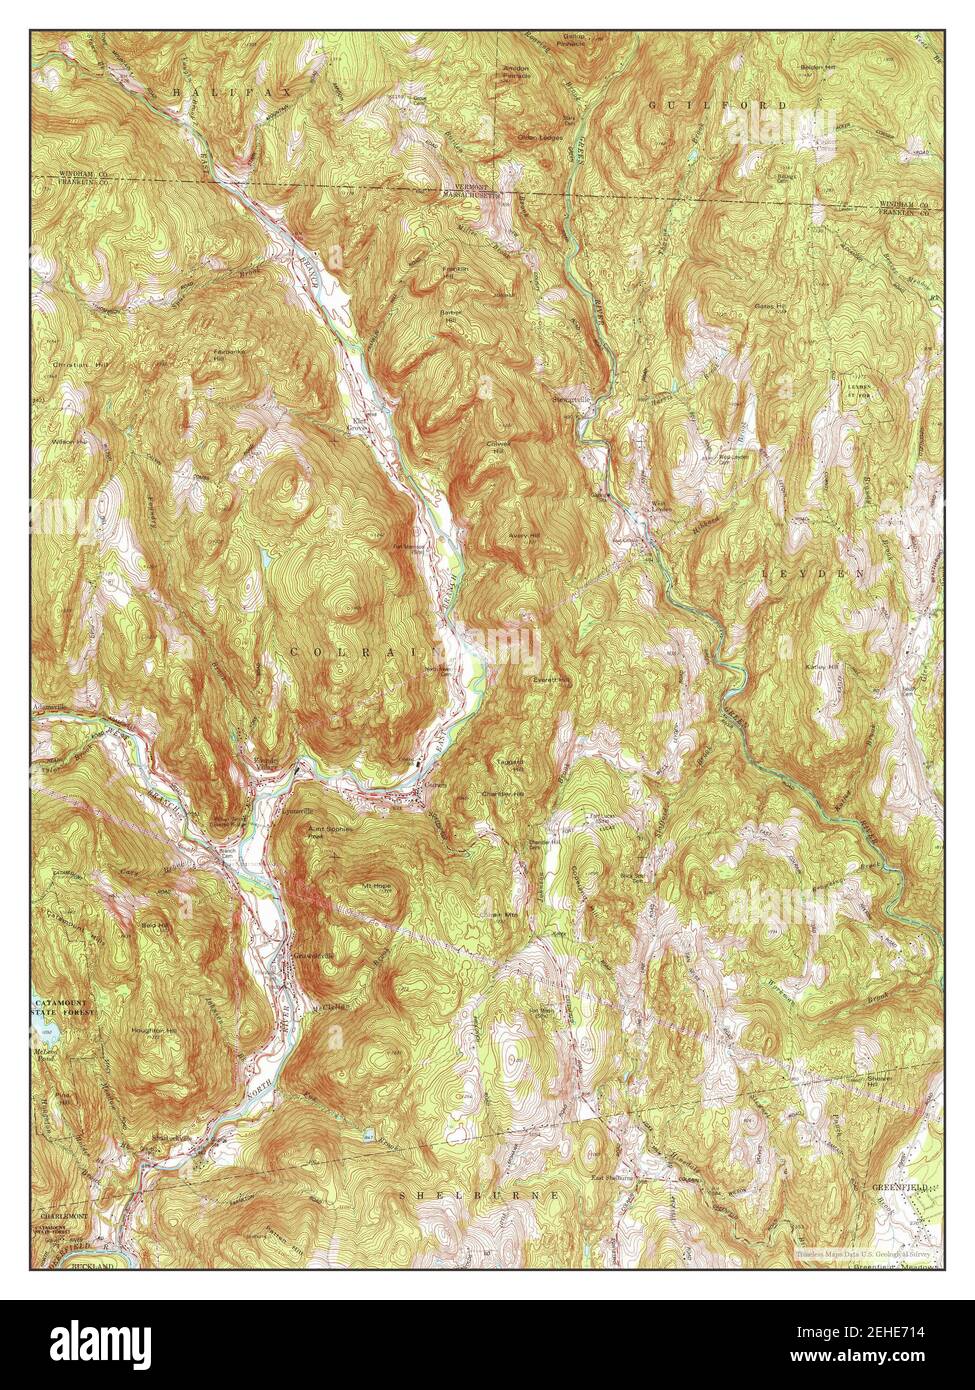 Colrain, Massachusetts, map 1977, 1:24000, United States of America by Timeless Maps, data U.S. Geological Survey Stock Photo